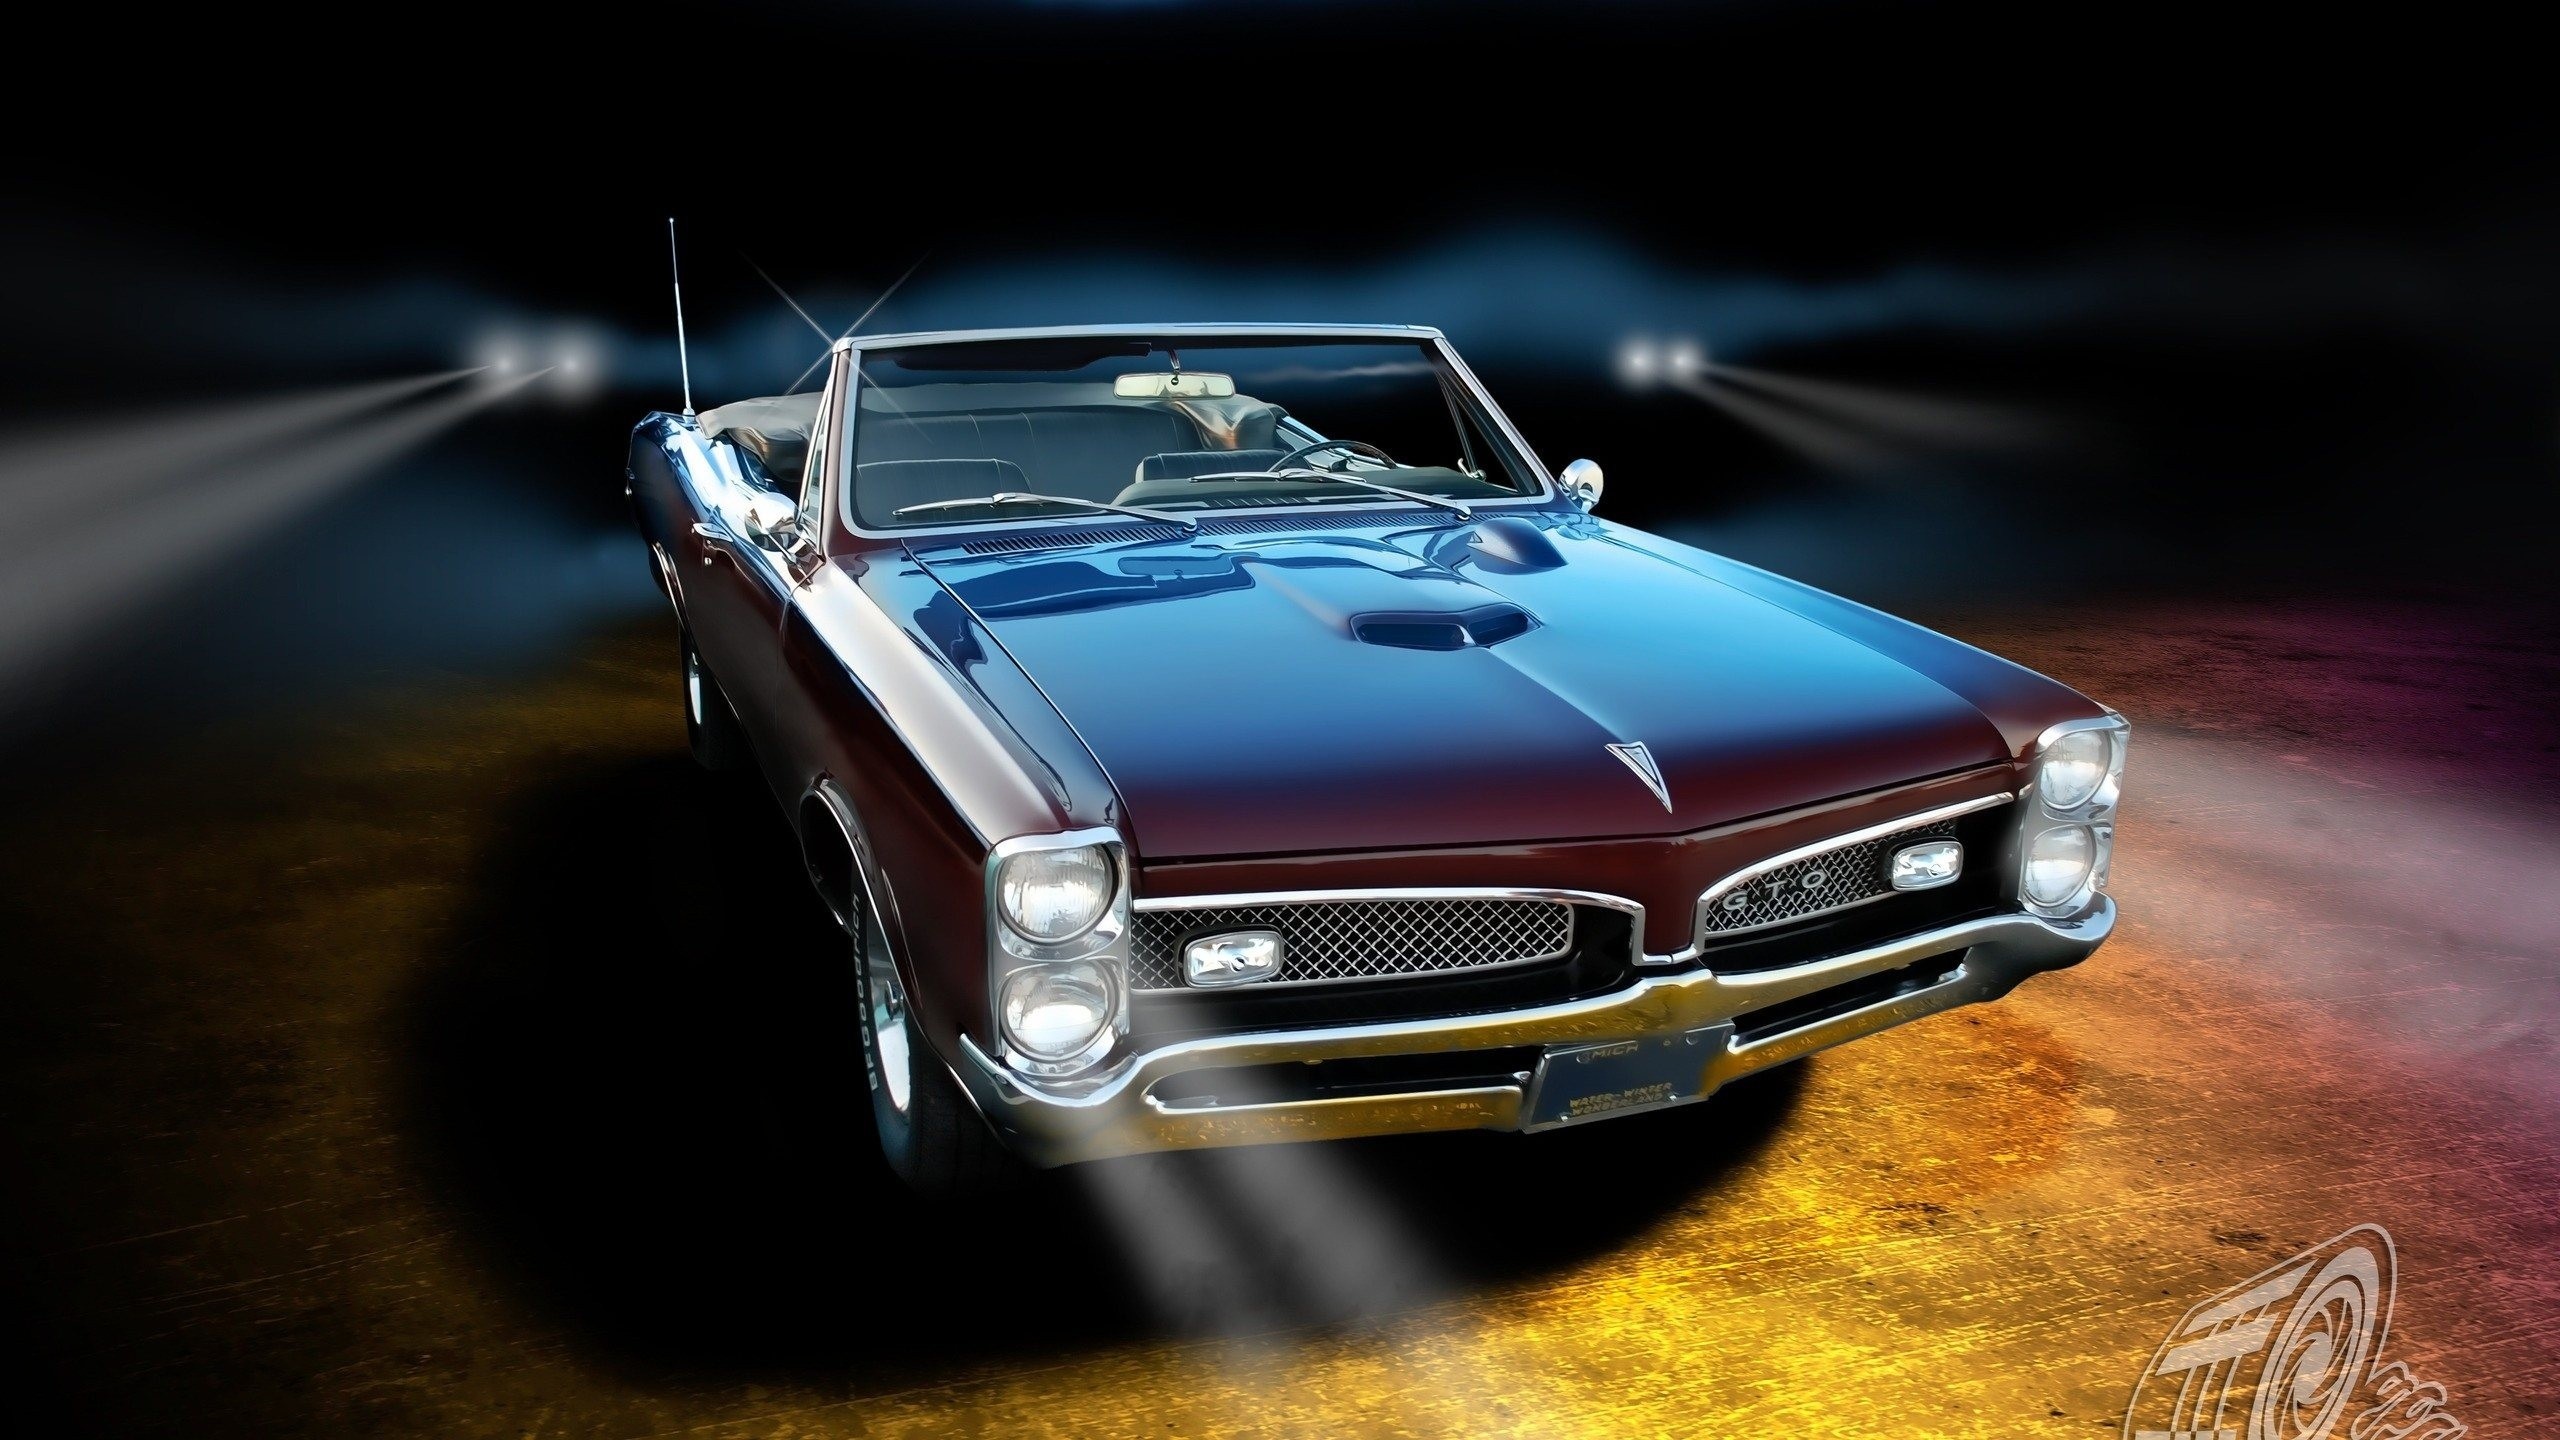 2560x1440 Classic Muscle Cars Wallpaper 17 with Classic Muscle Cars Wallpaper